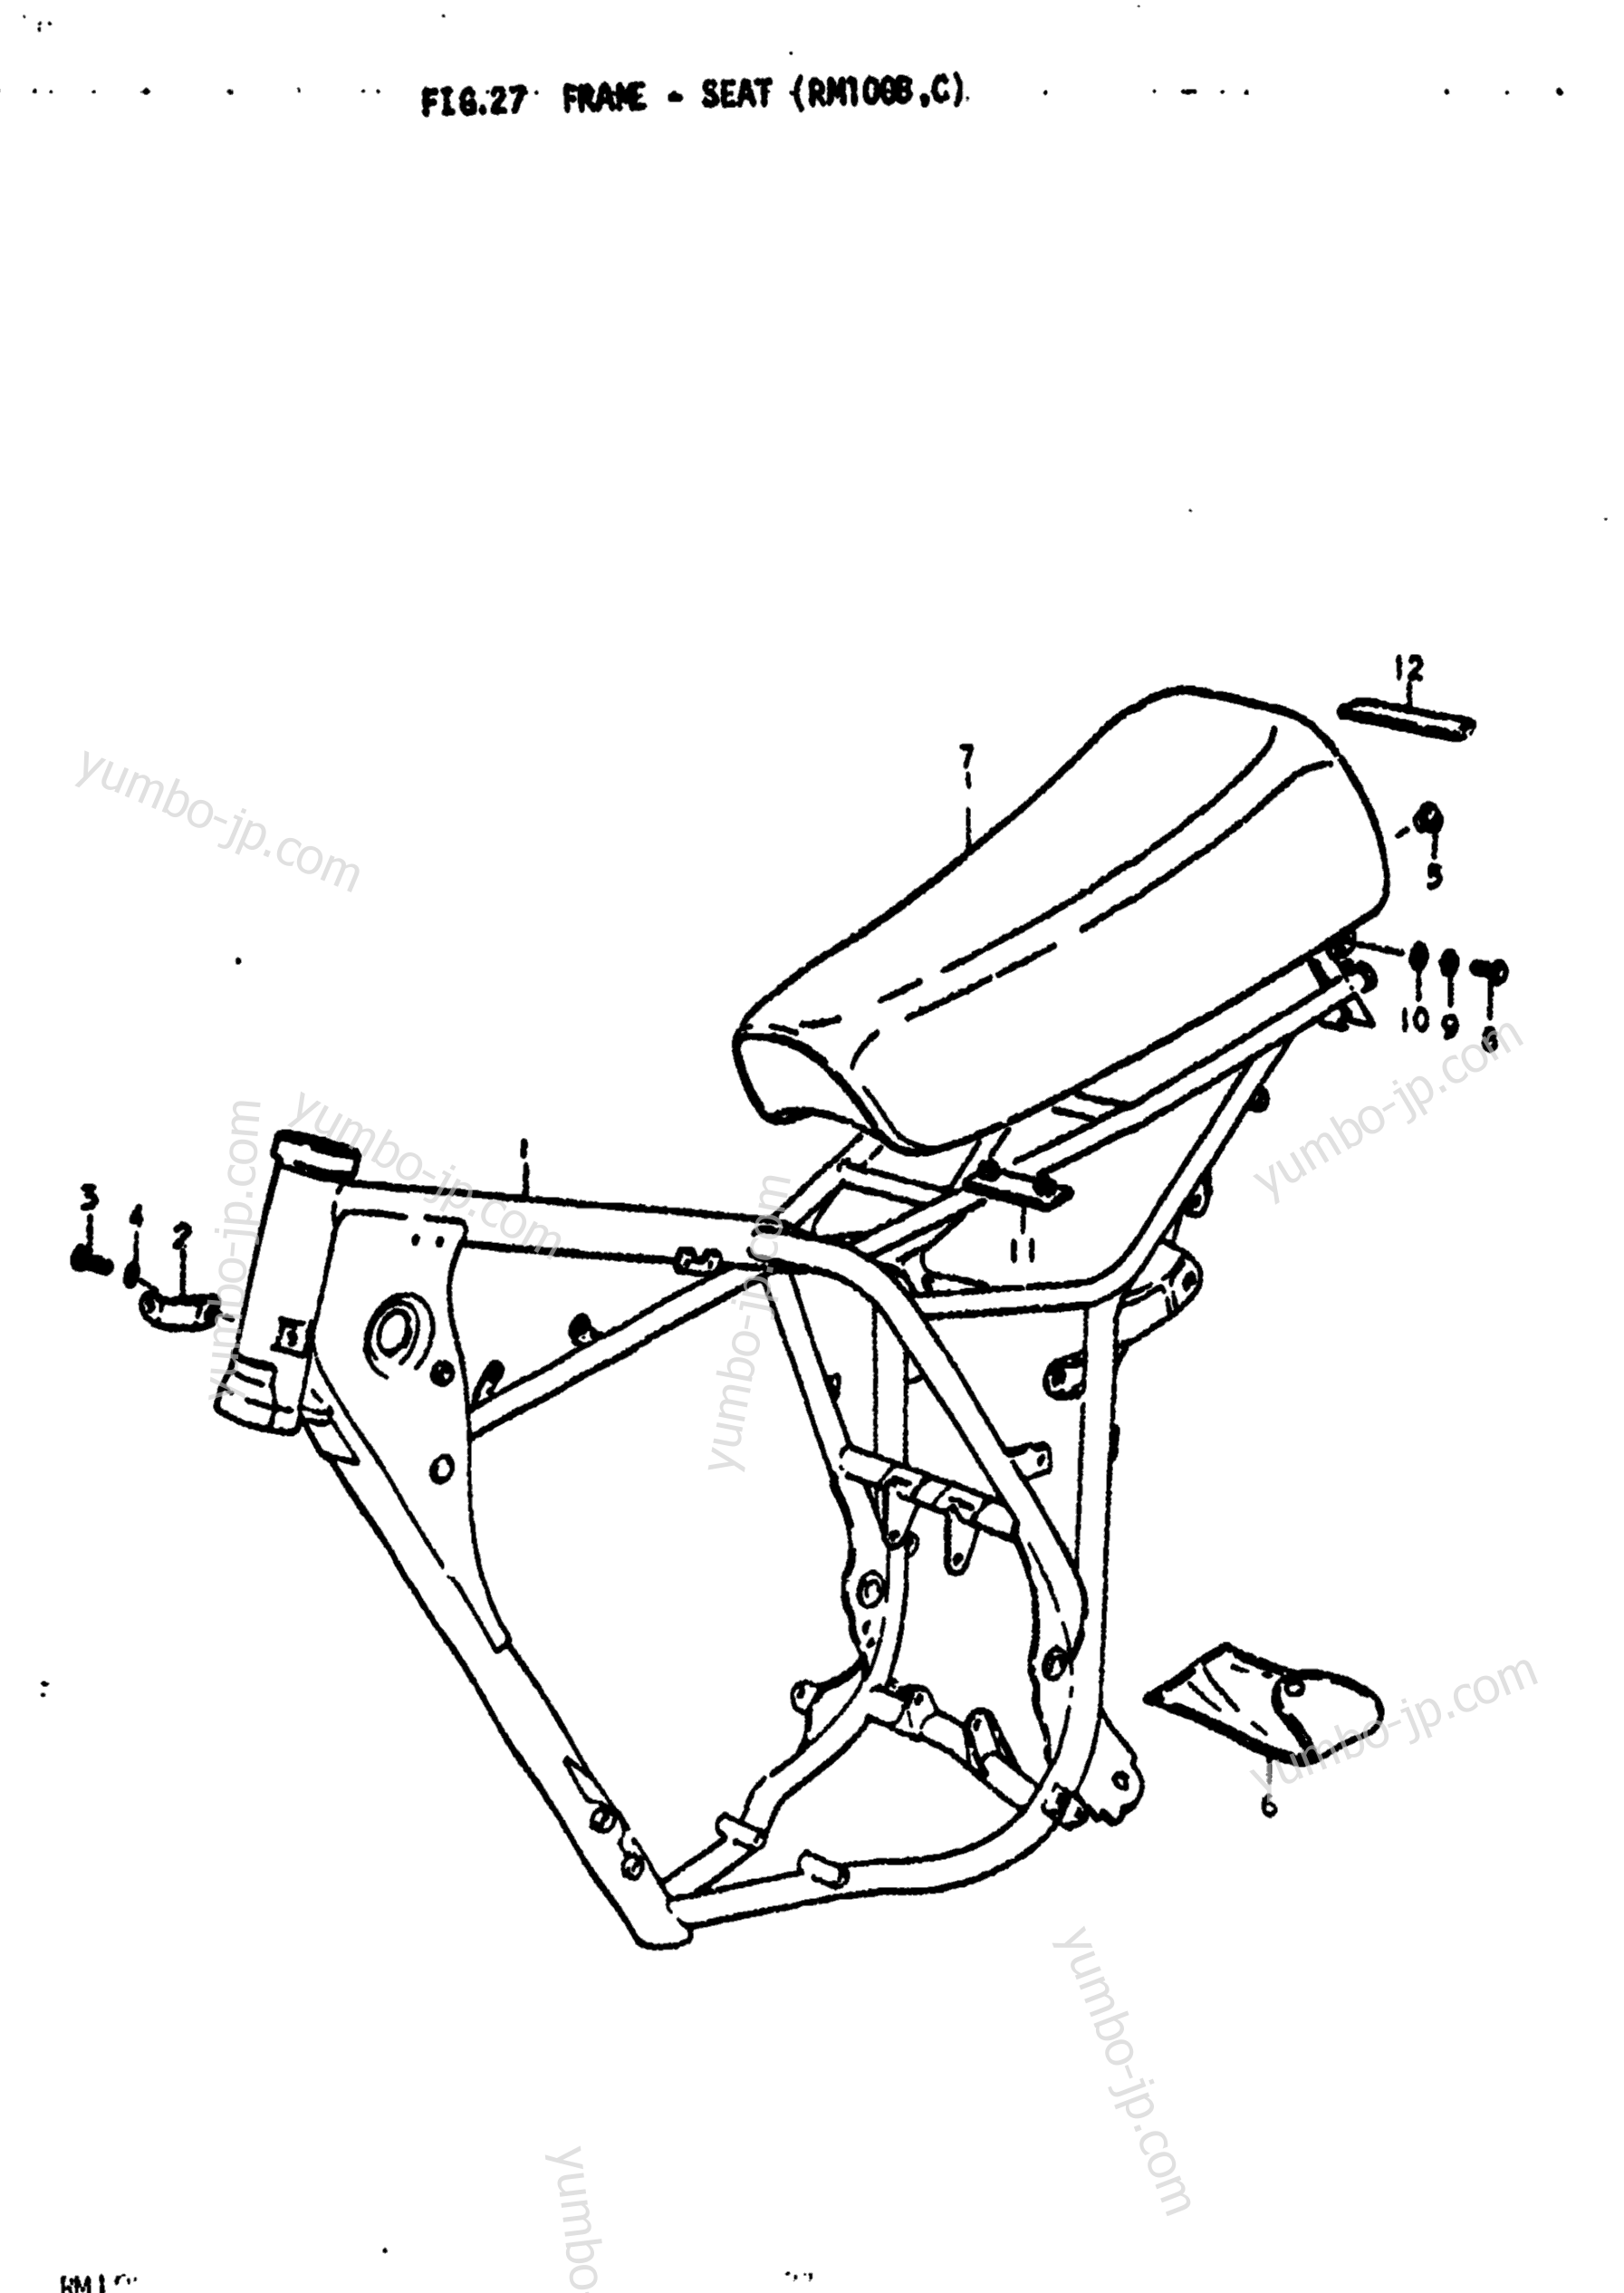 FRAME - SEAT (RM100B for motorcycles SUZUKI RM100 1976 year